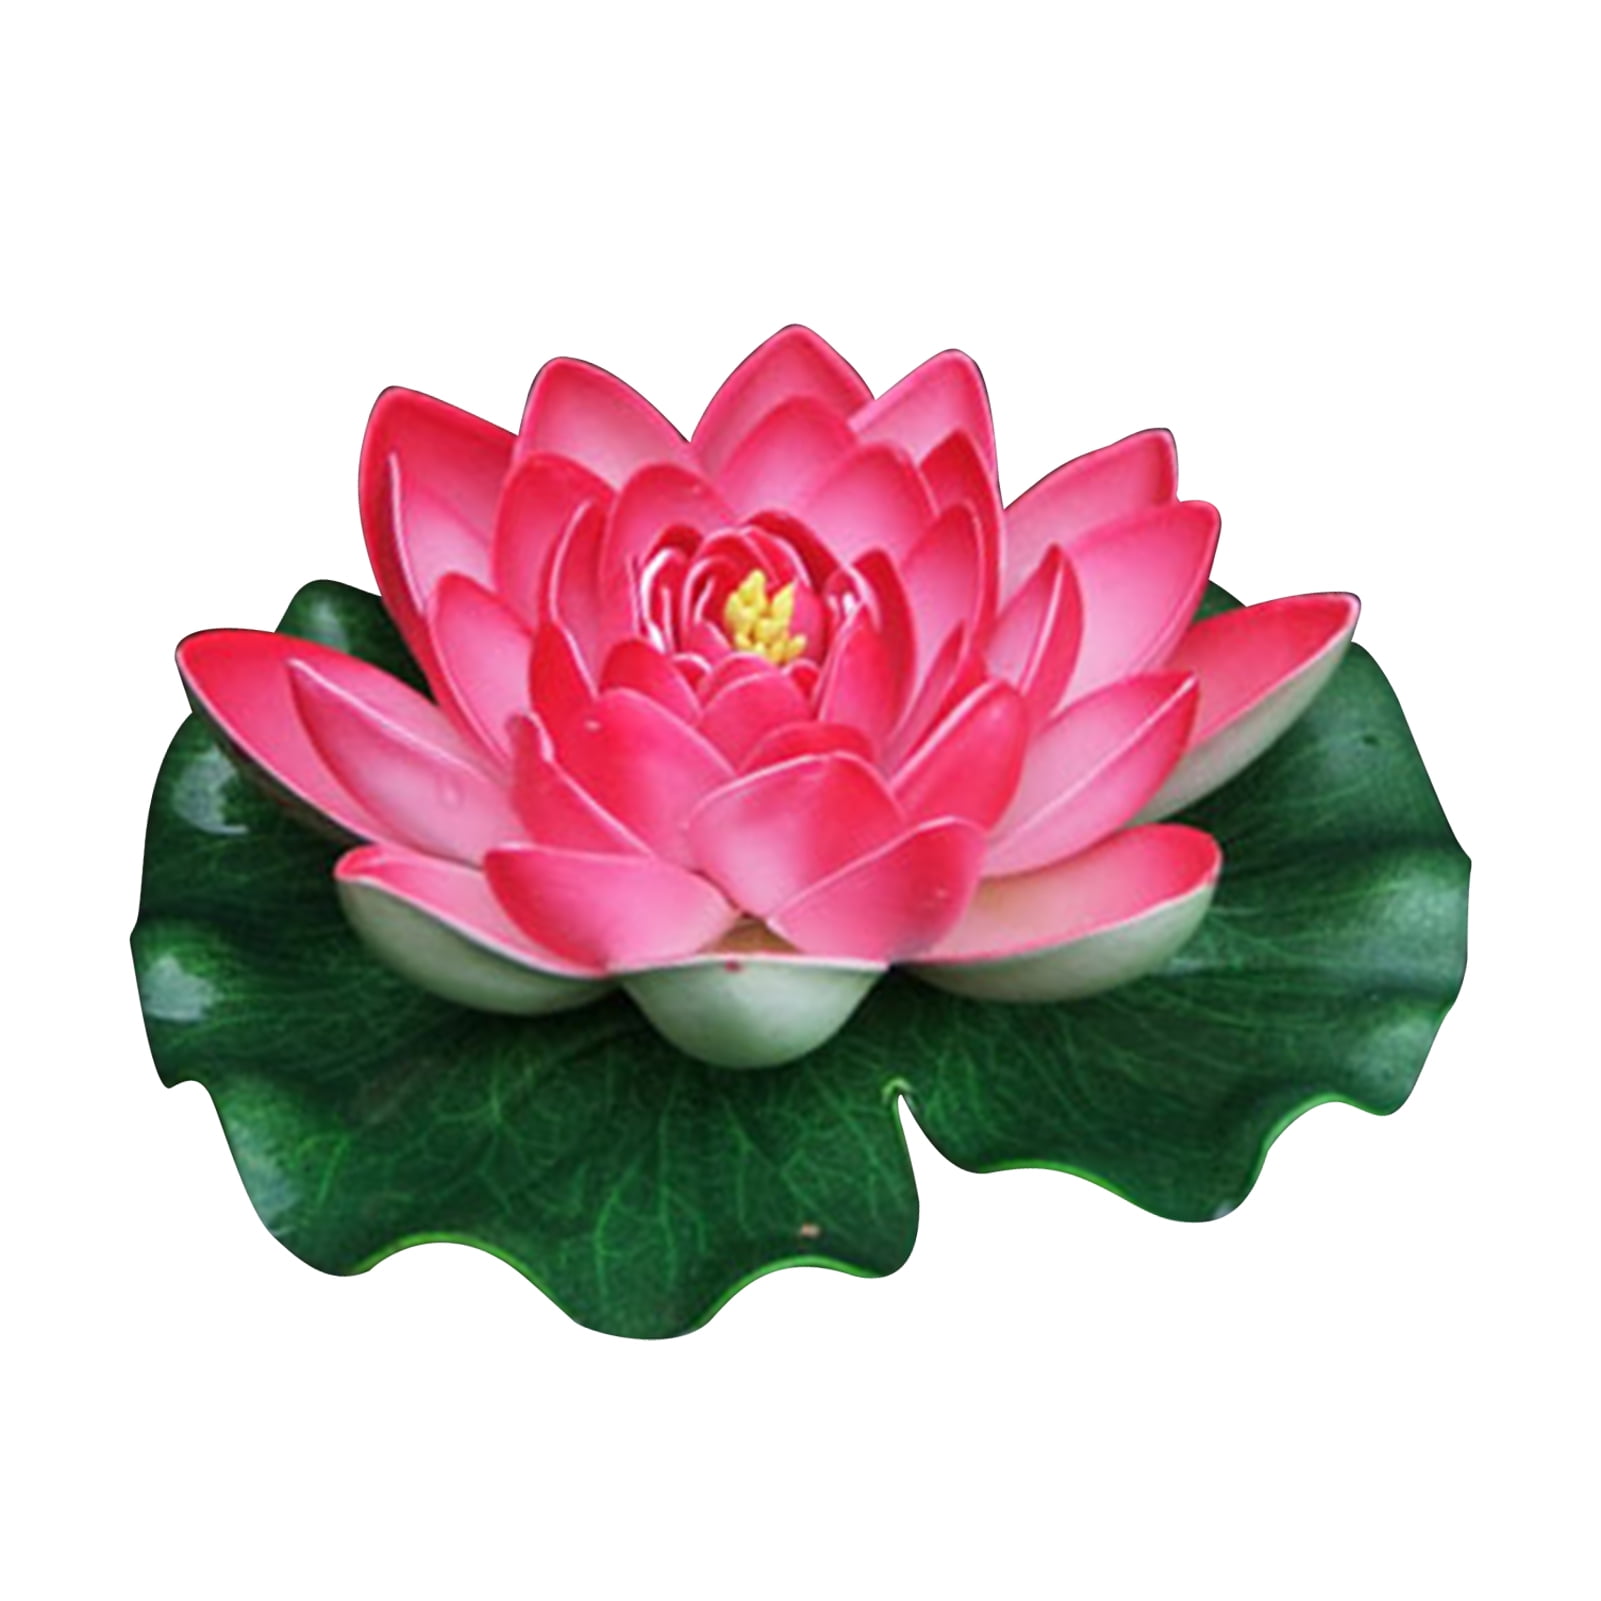 Details about   JETEHO Set of 8 Artificial Floating Lotus Flower Water Lily for Home Garden Pon 